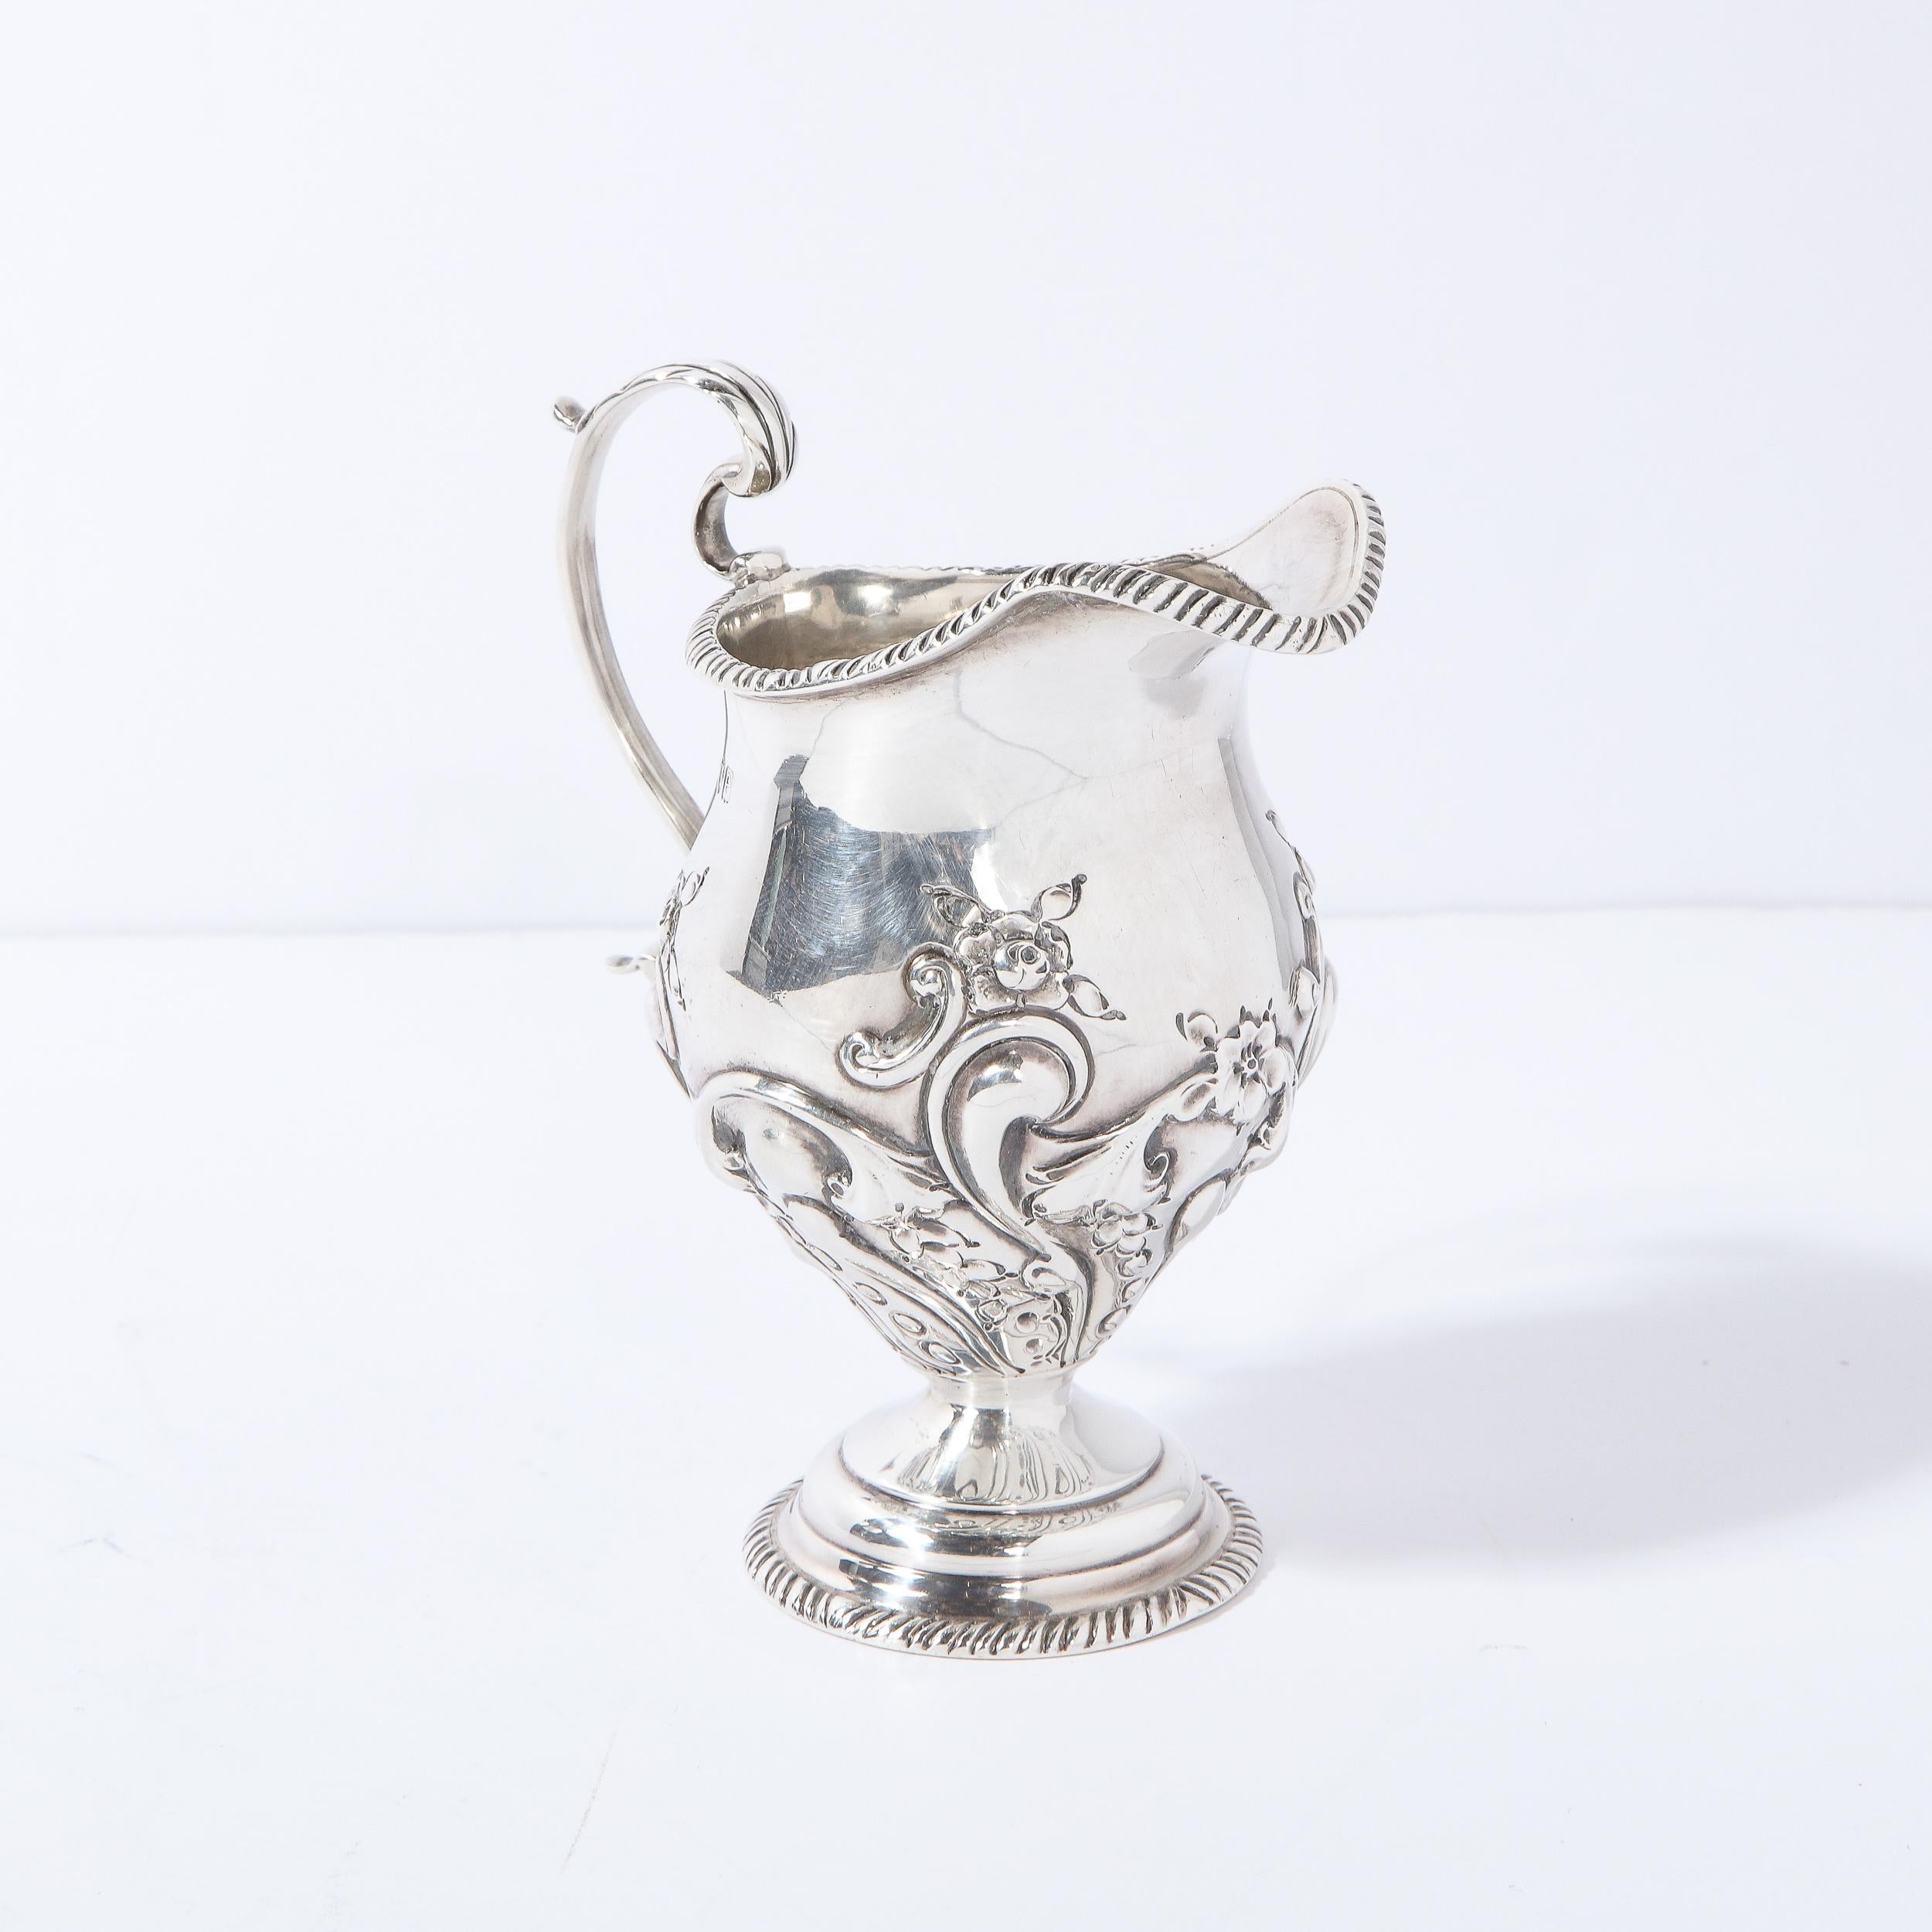 Neoclassical Victorian Silverplate Creamer by Charles Pilling for Sibray, Hall & Co Ltd 